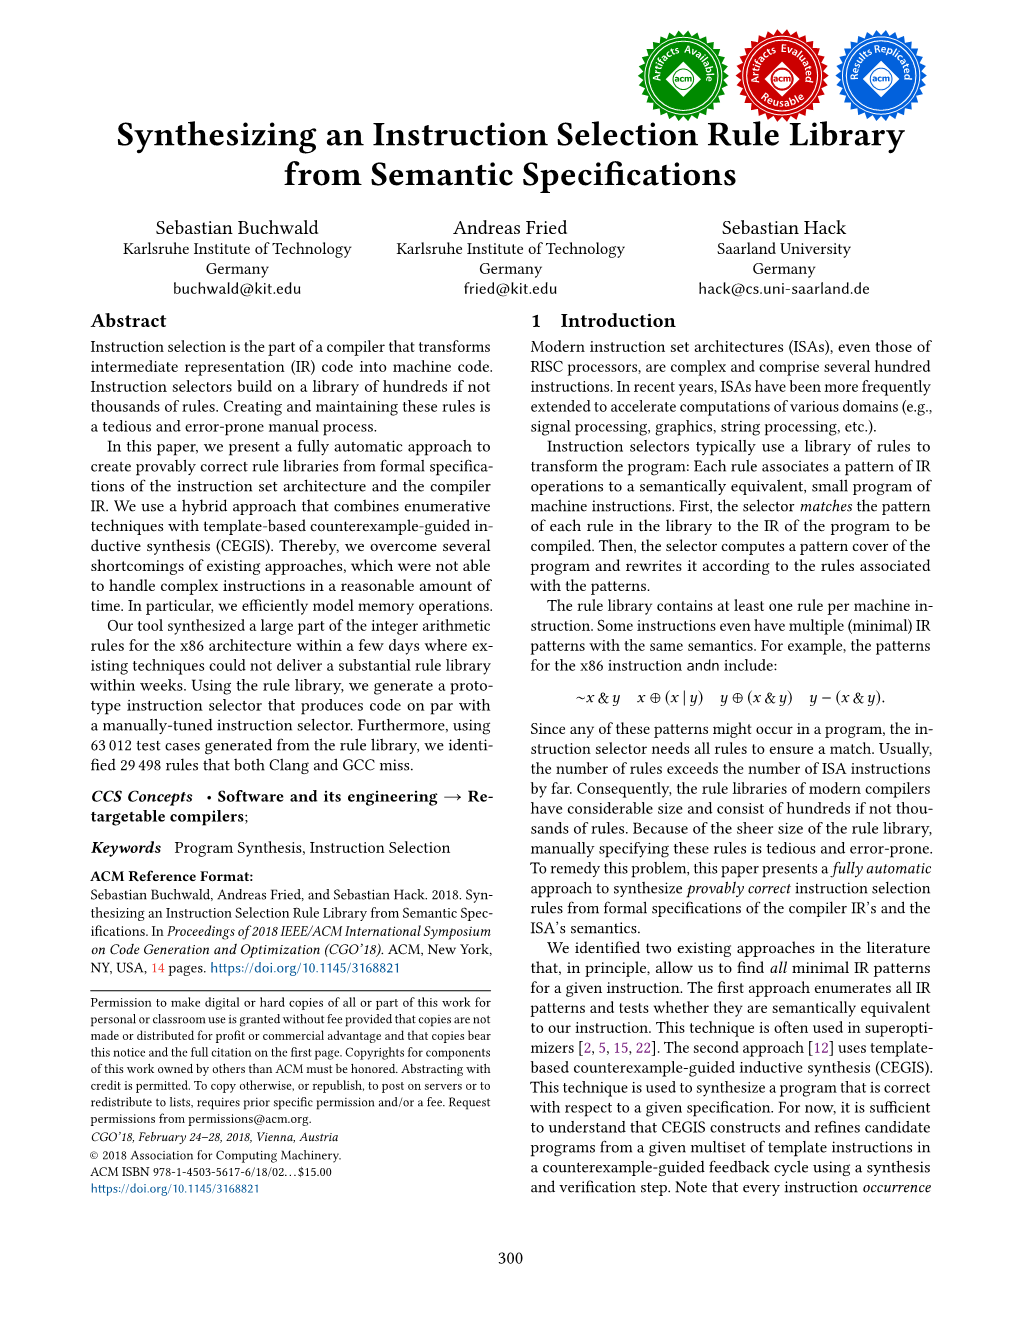 Synthesizing an Instruction Selection Rule Library from Semantic Specifications